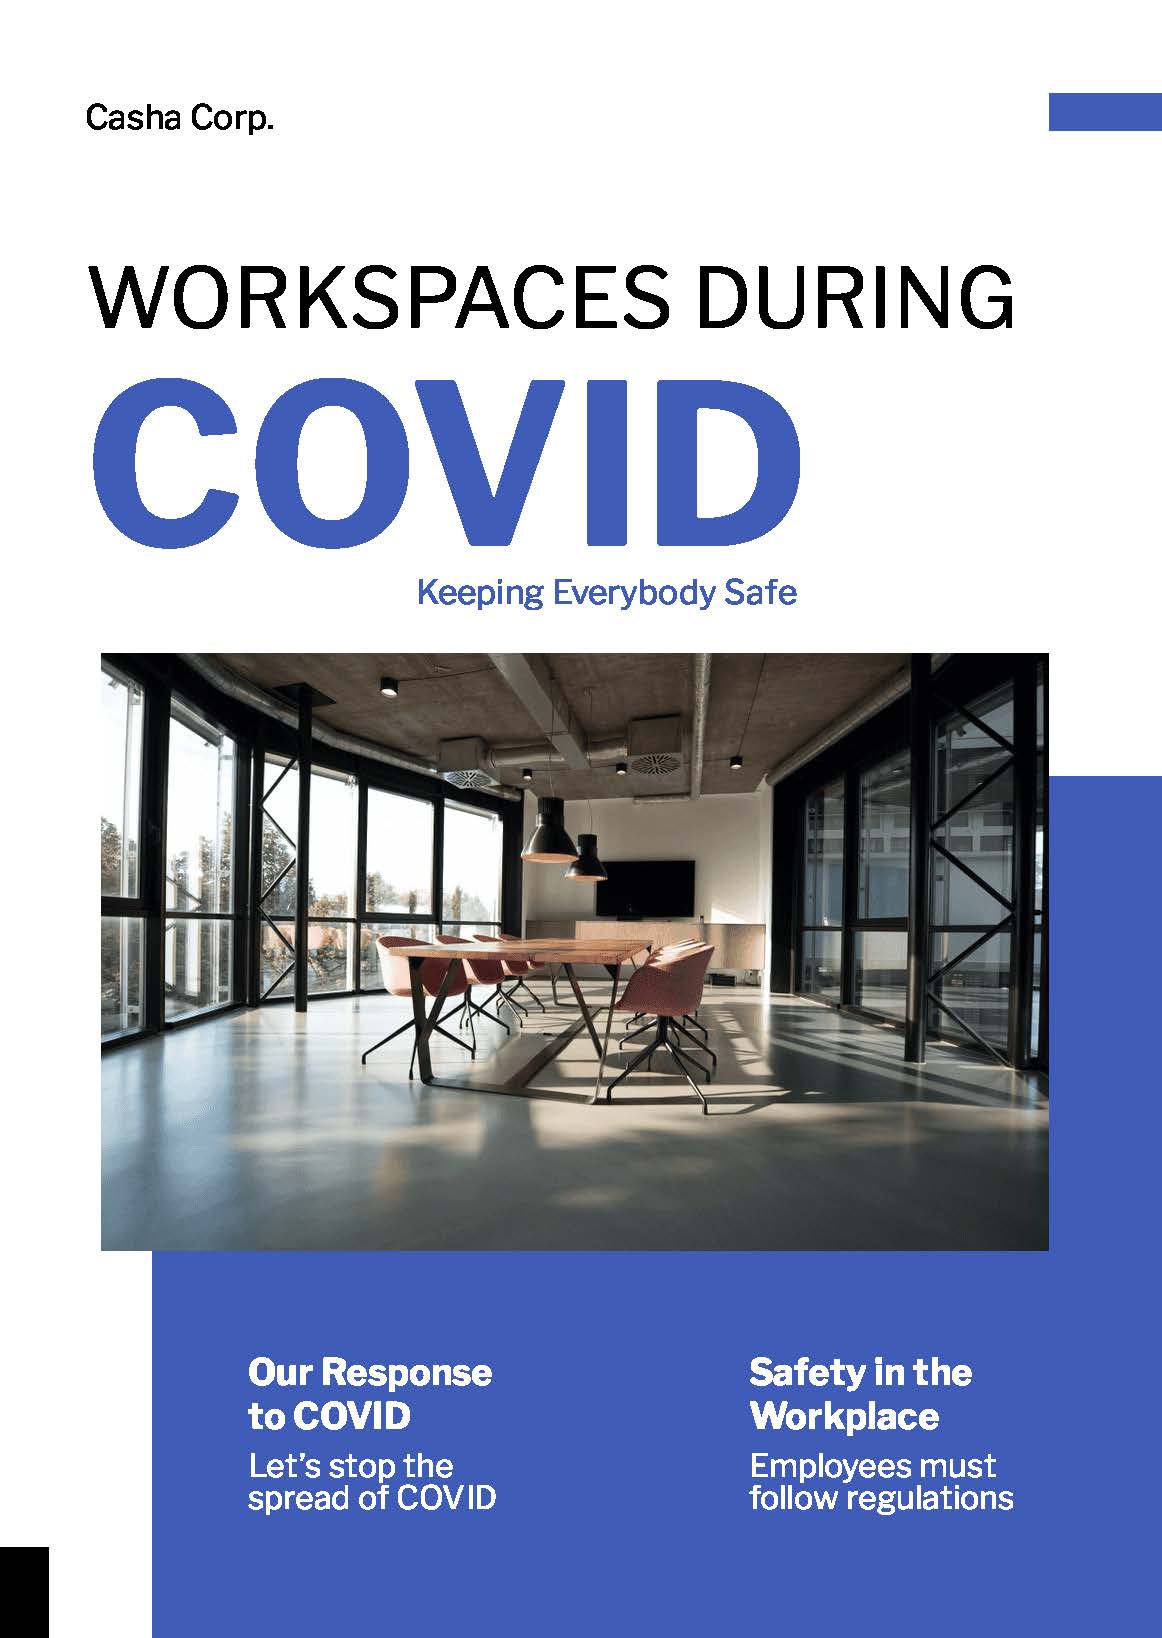 Workspaces During COVID Booklet Template